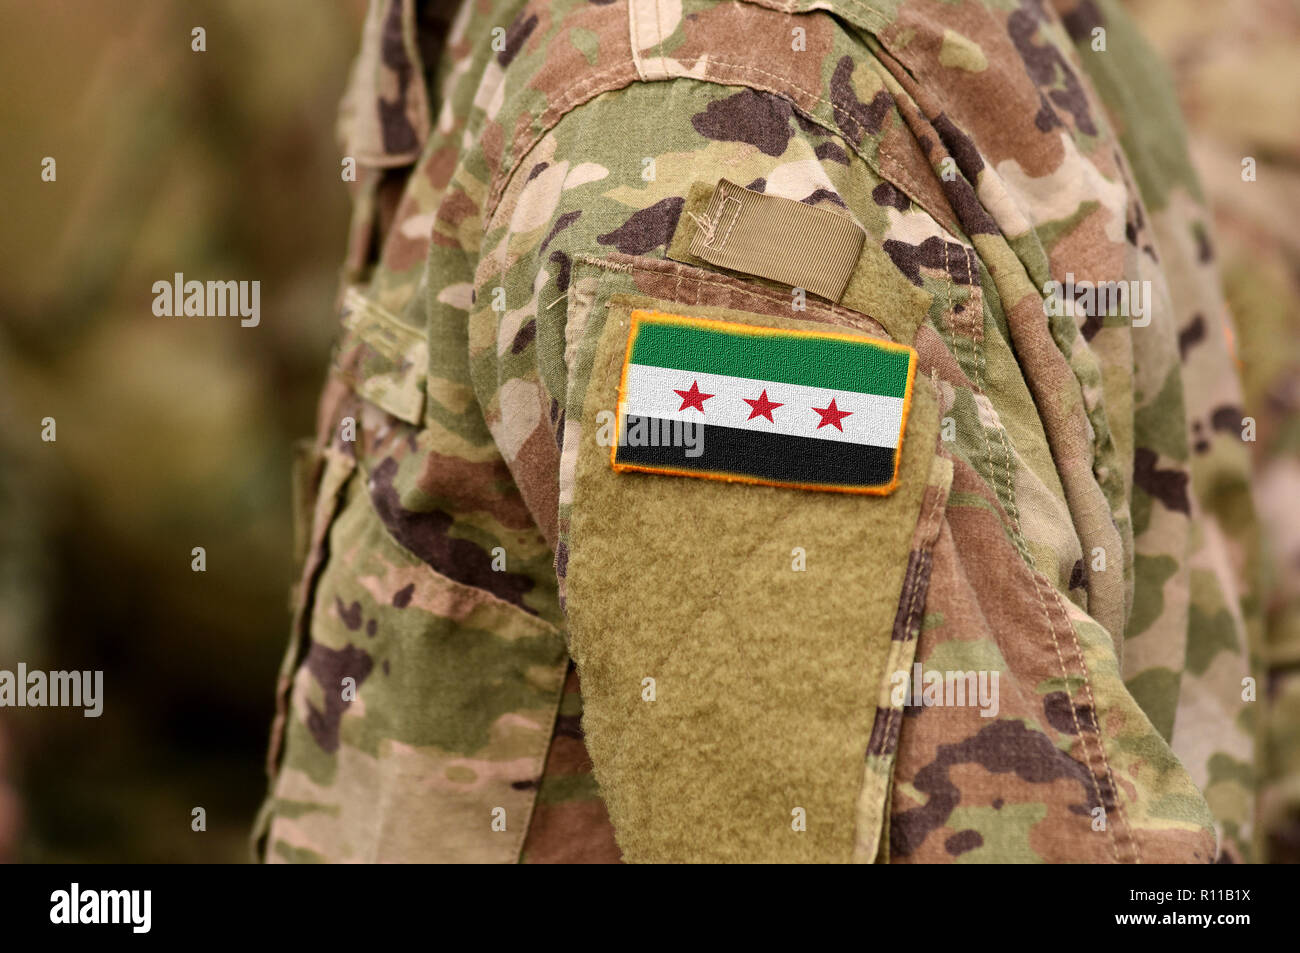 Soldiers arm with Flag used by the Syrian Opposition and Syrian Revolutionary and Opposition Forces Stock Photo